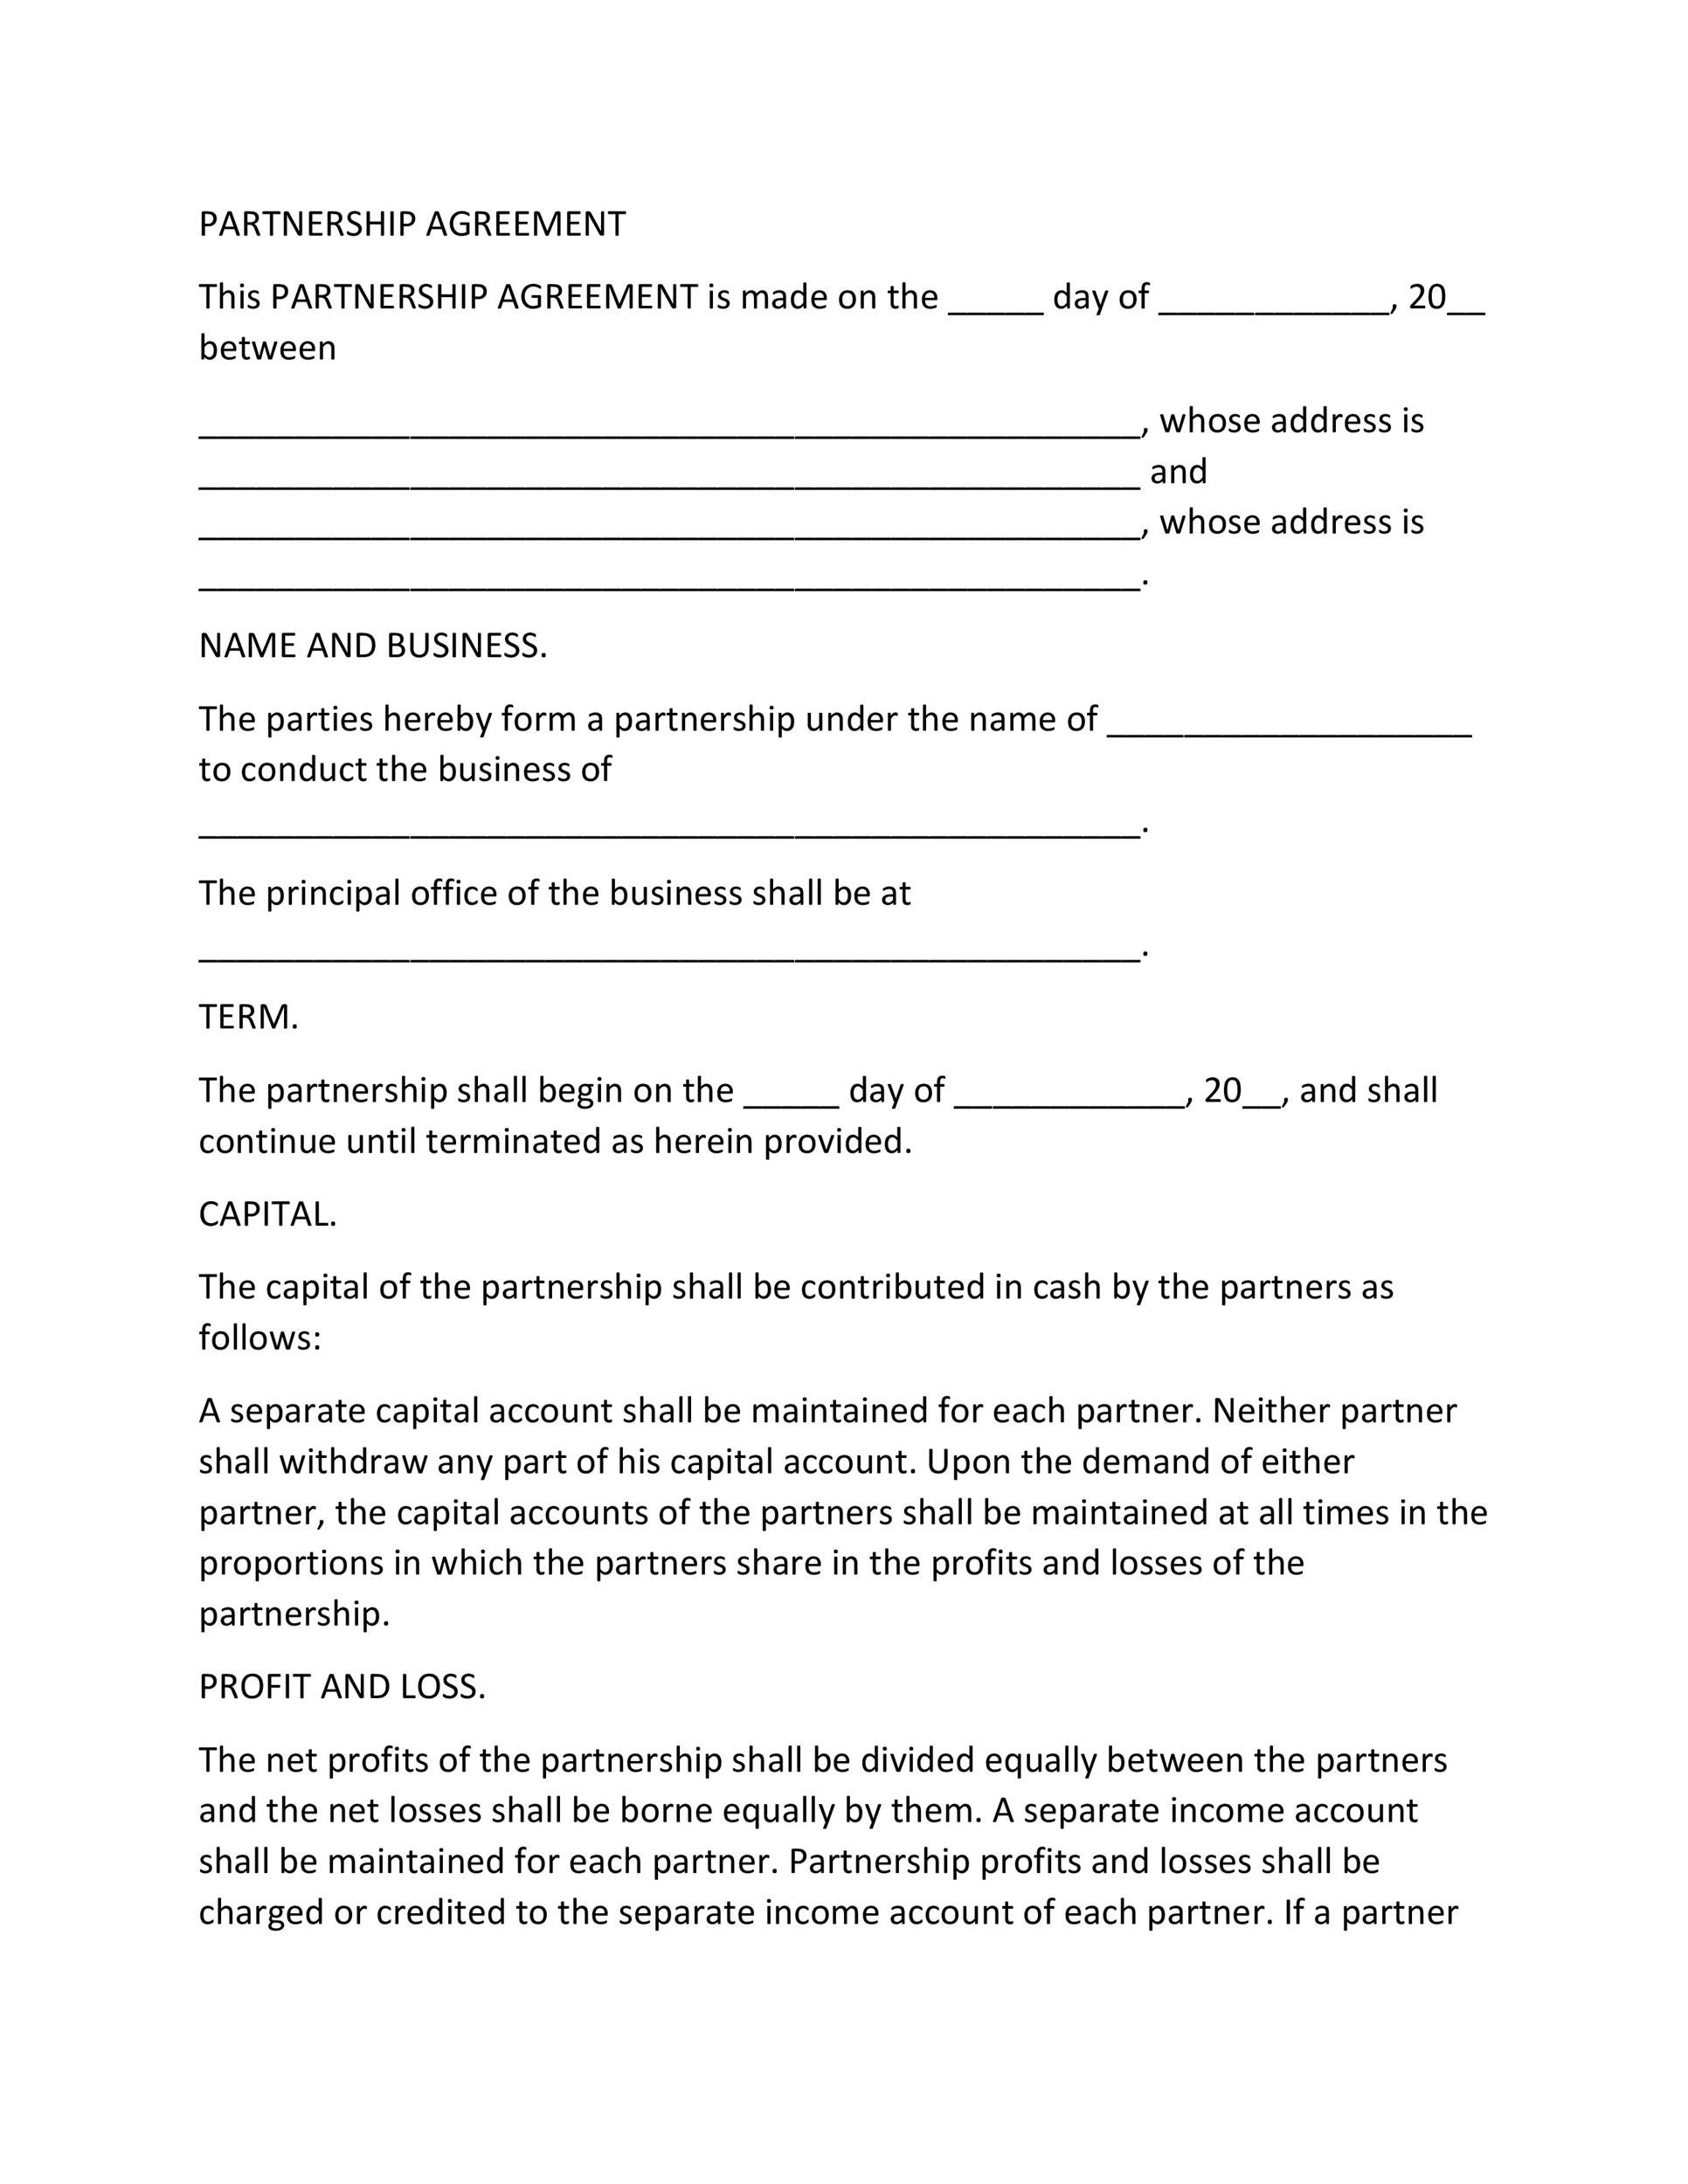 Partnership Agreement Template Free from templatelab.com